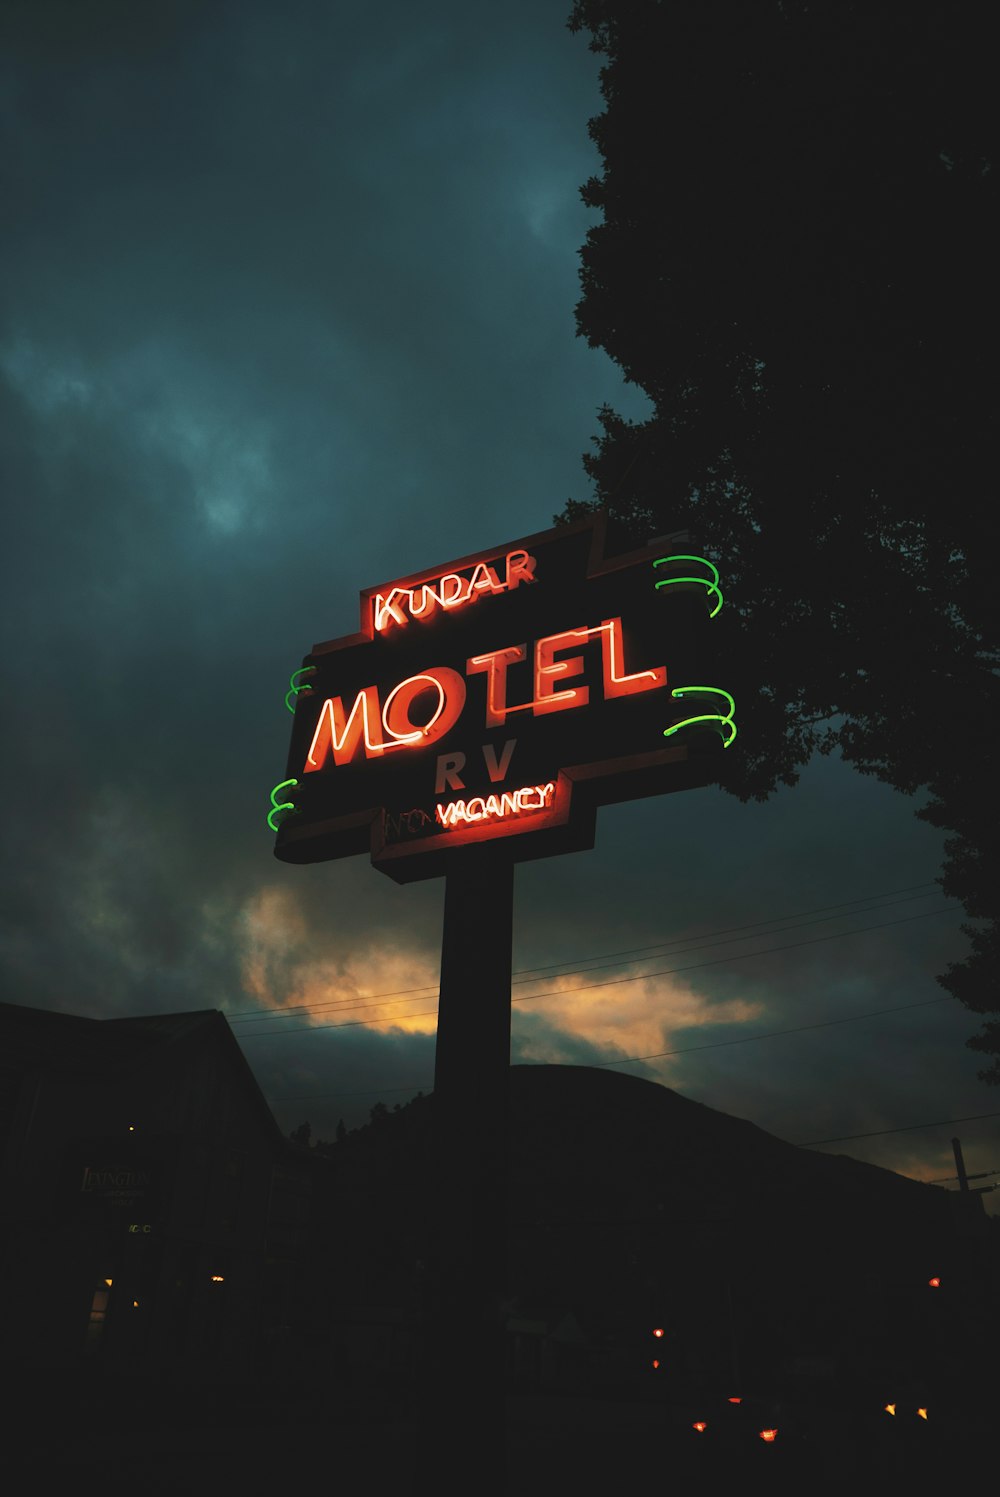 a motel sign lit up at night under a cloudy sky